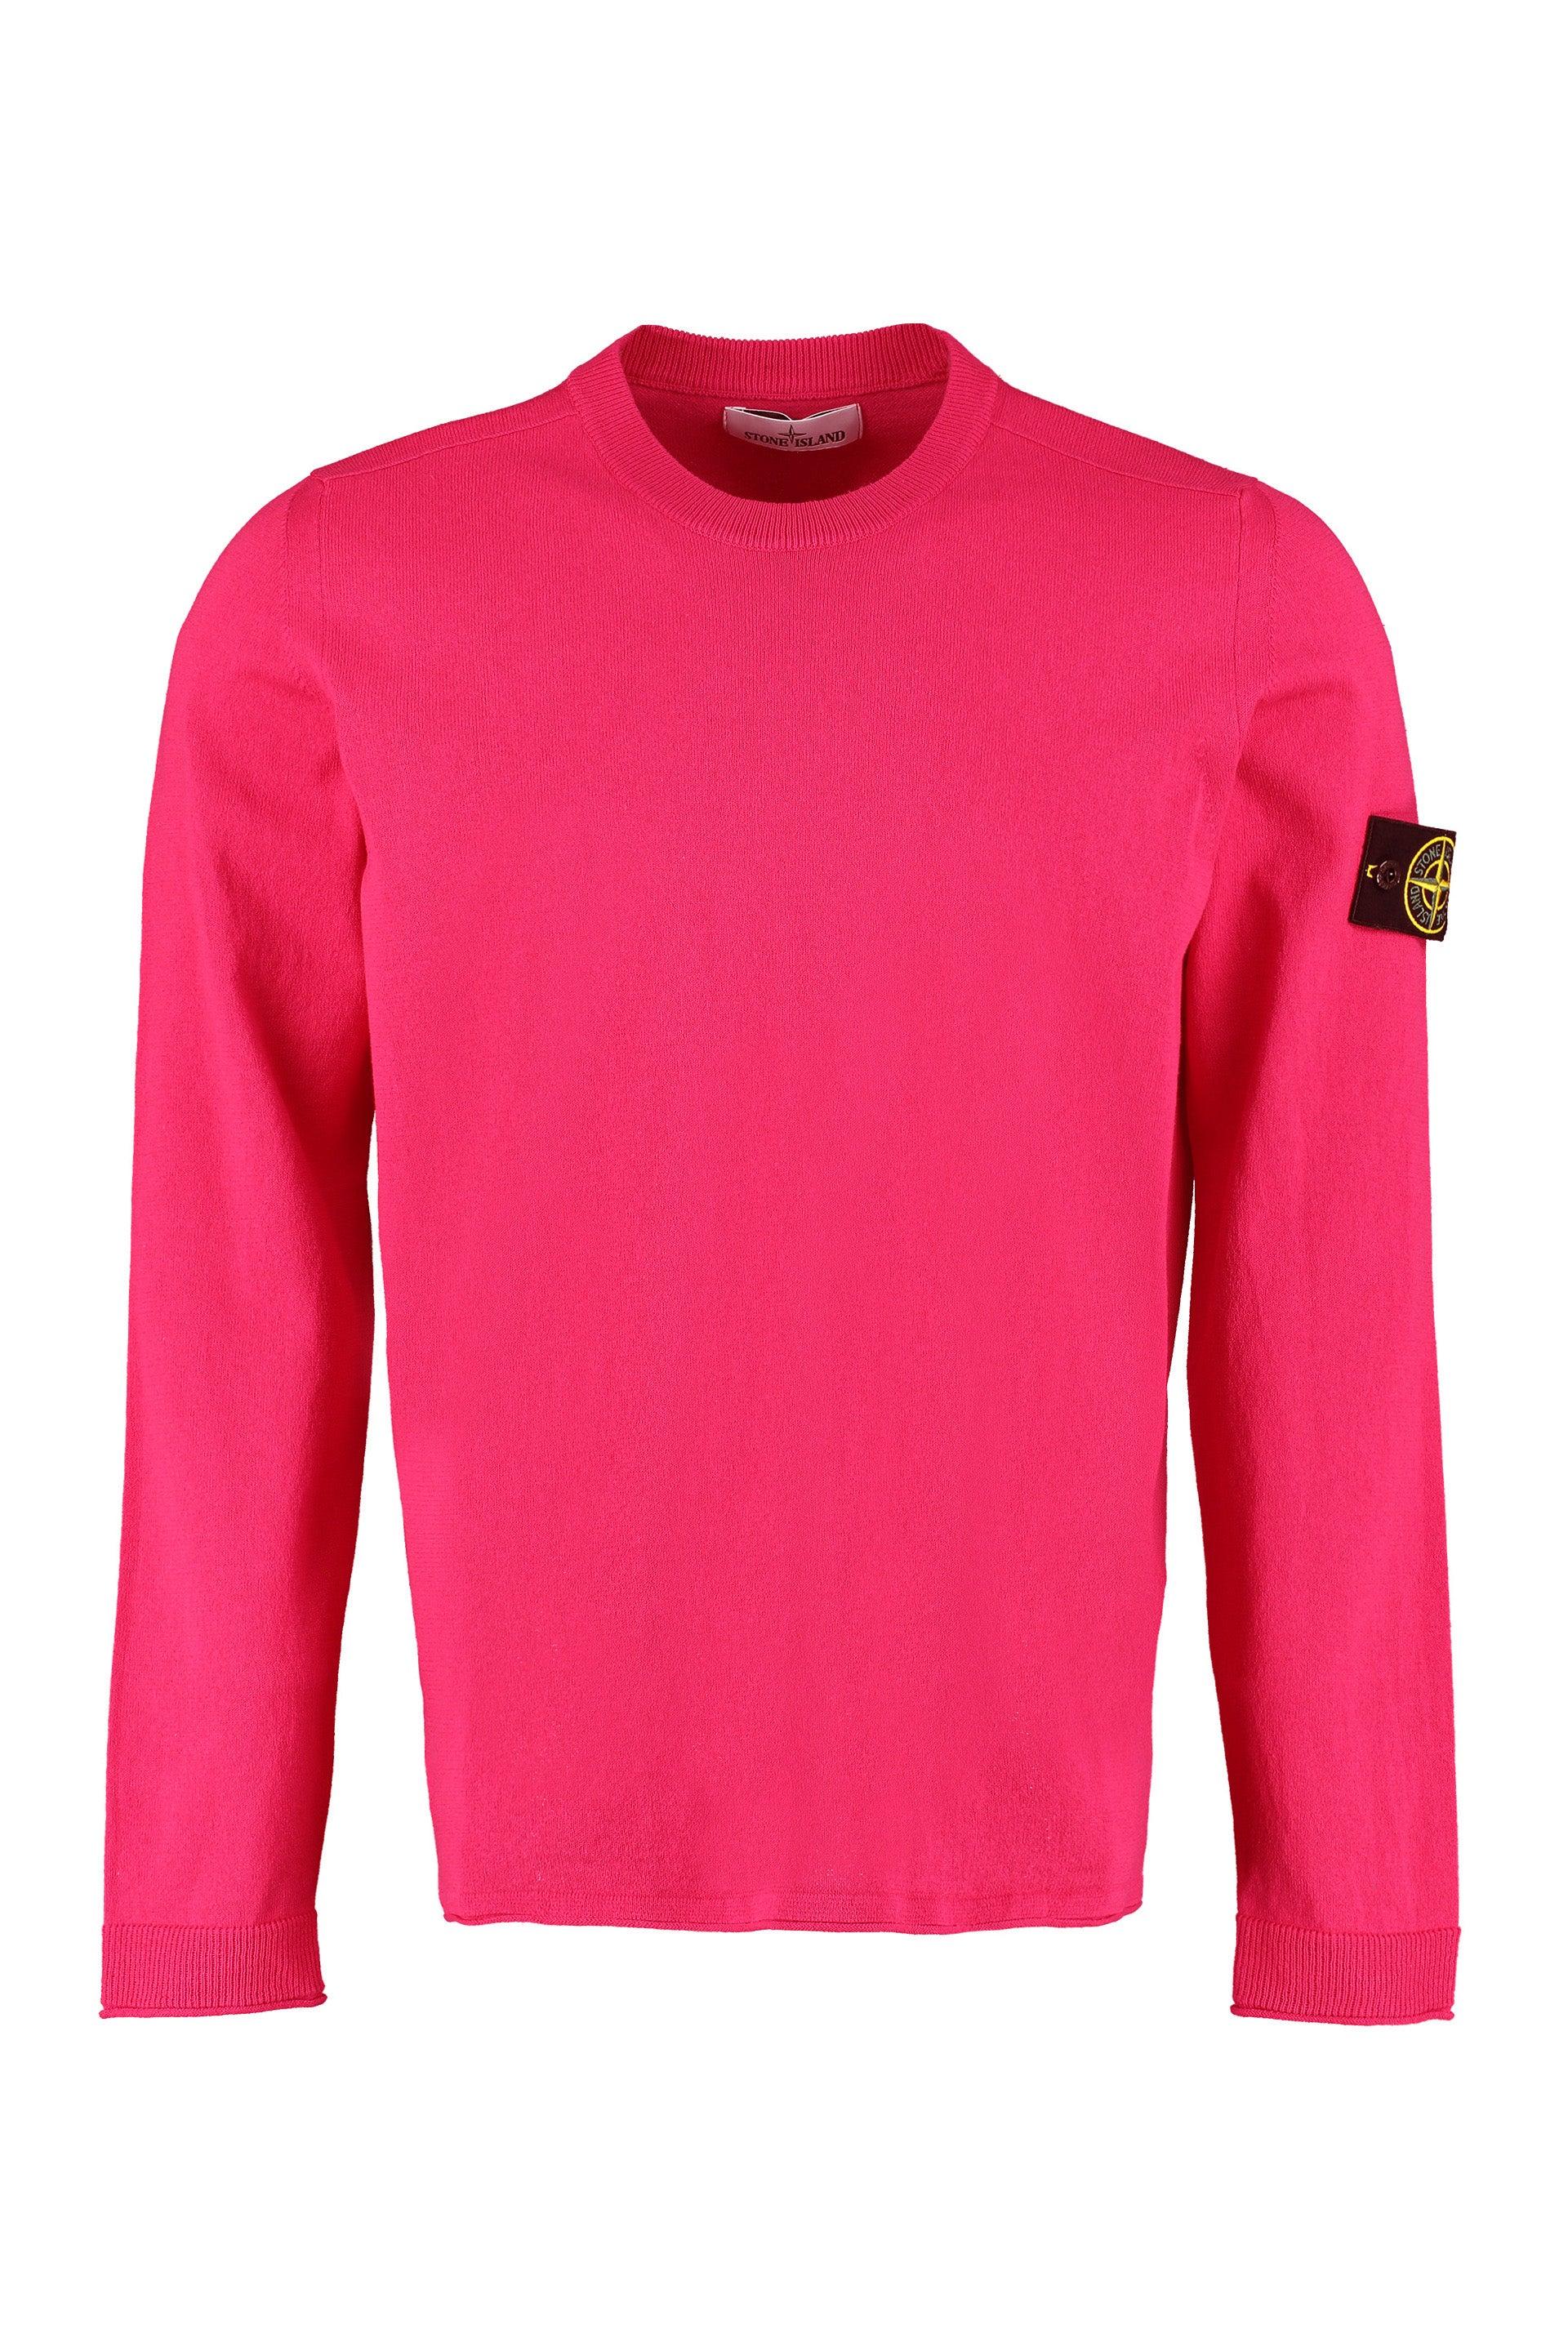 matras Hassy haspel Stone Island Cotton Crew-neck Sweater in Pink for Men | Lyst